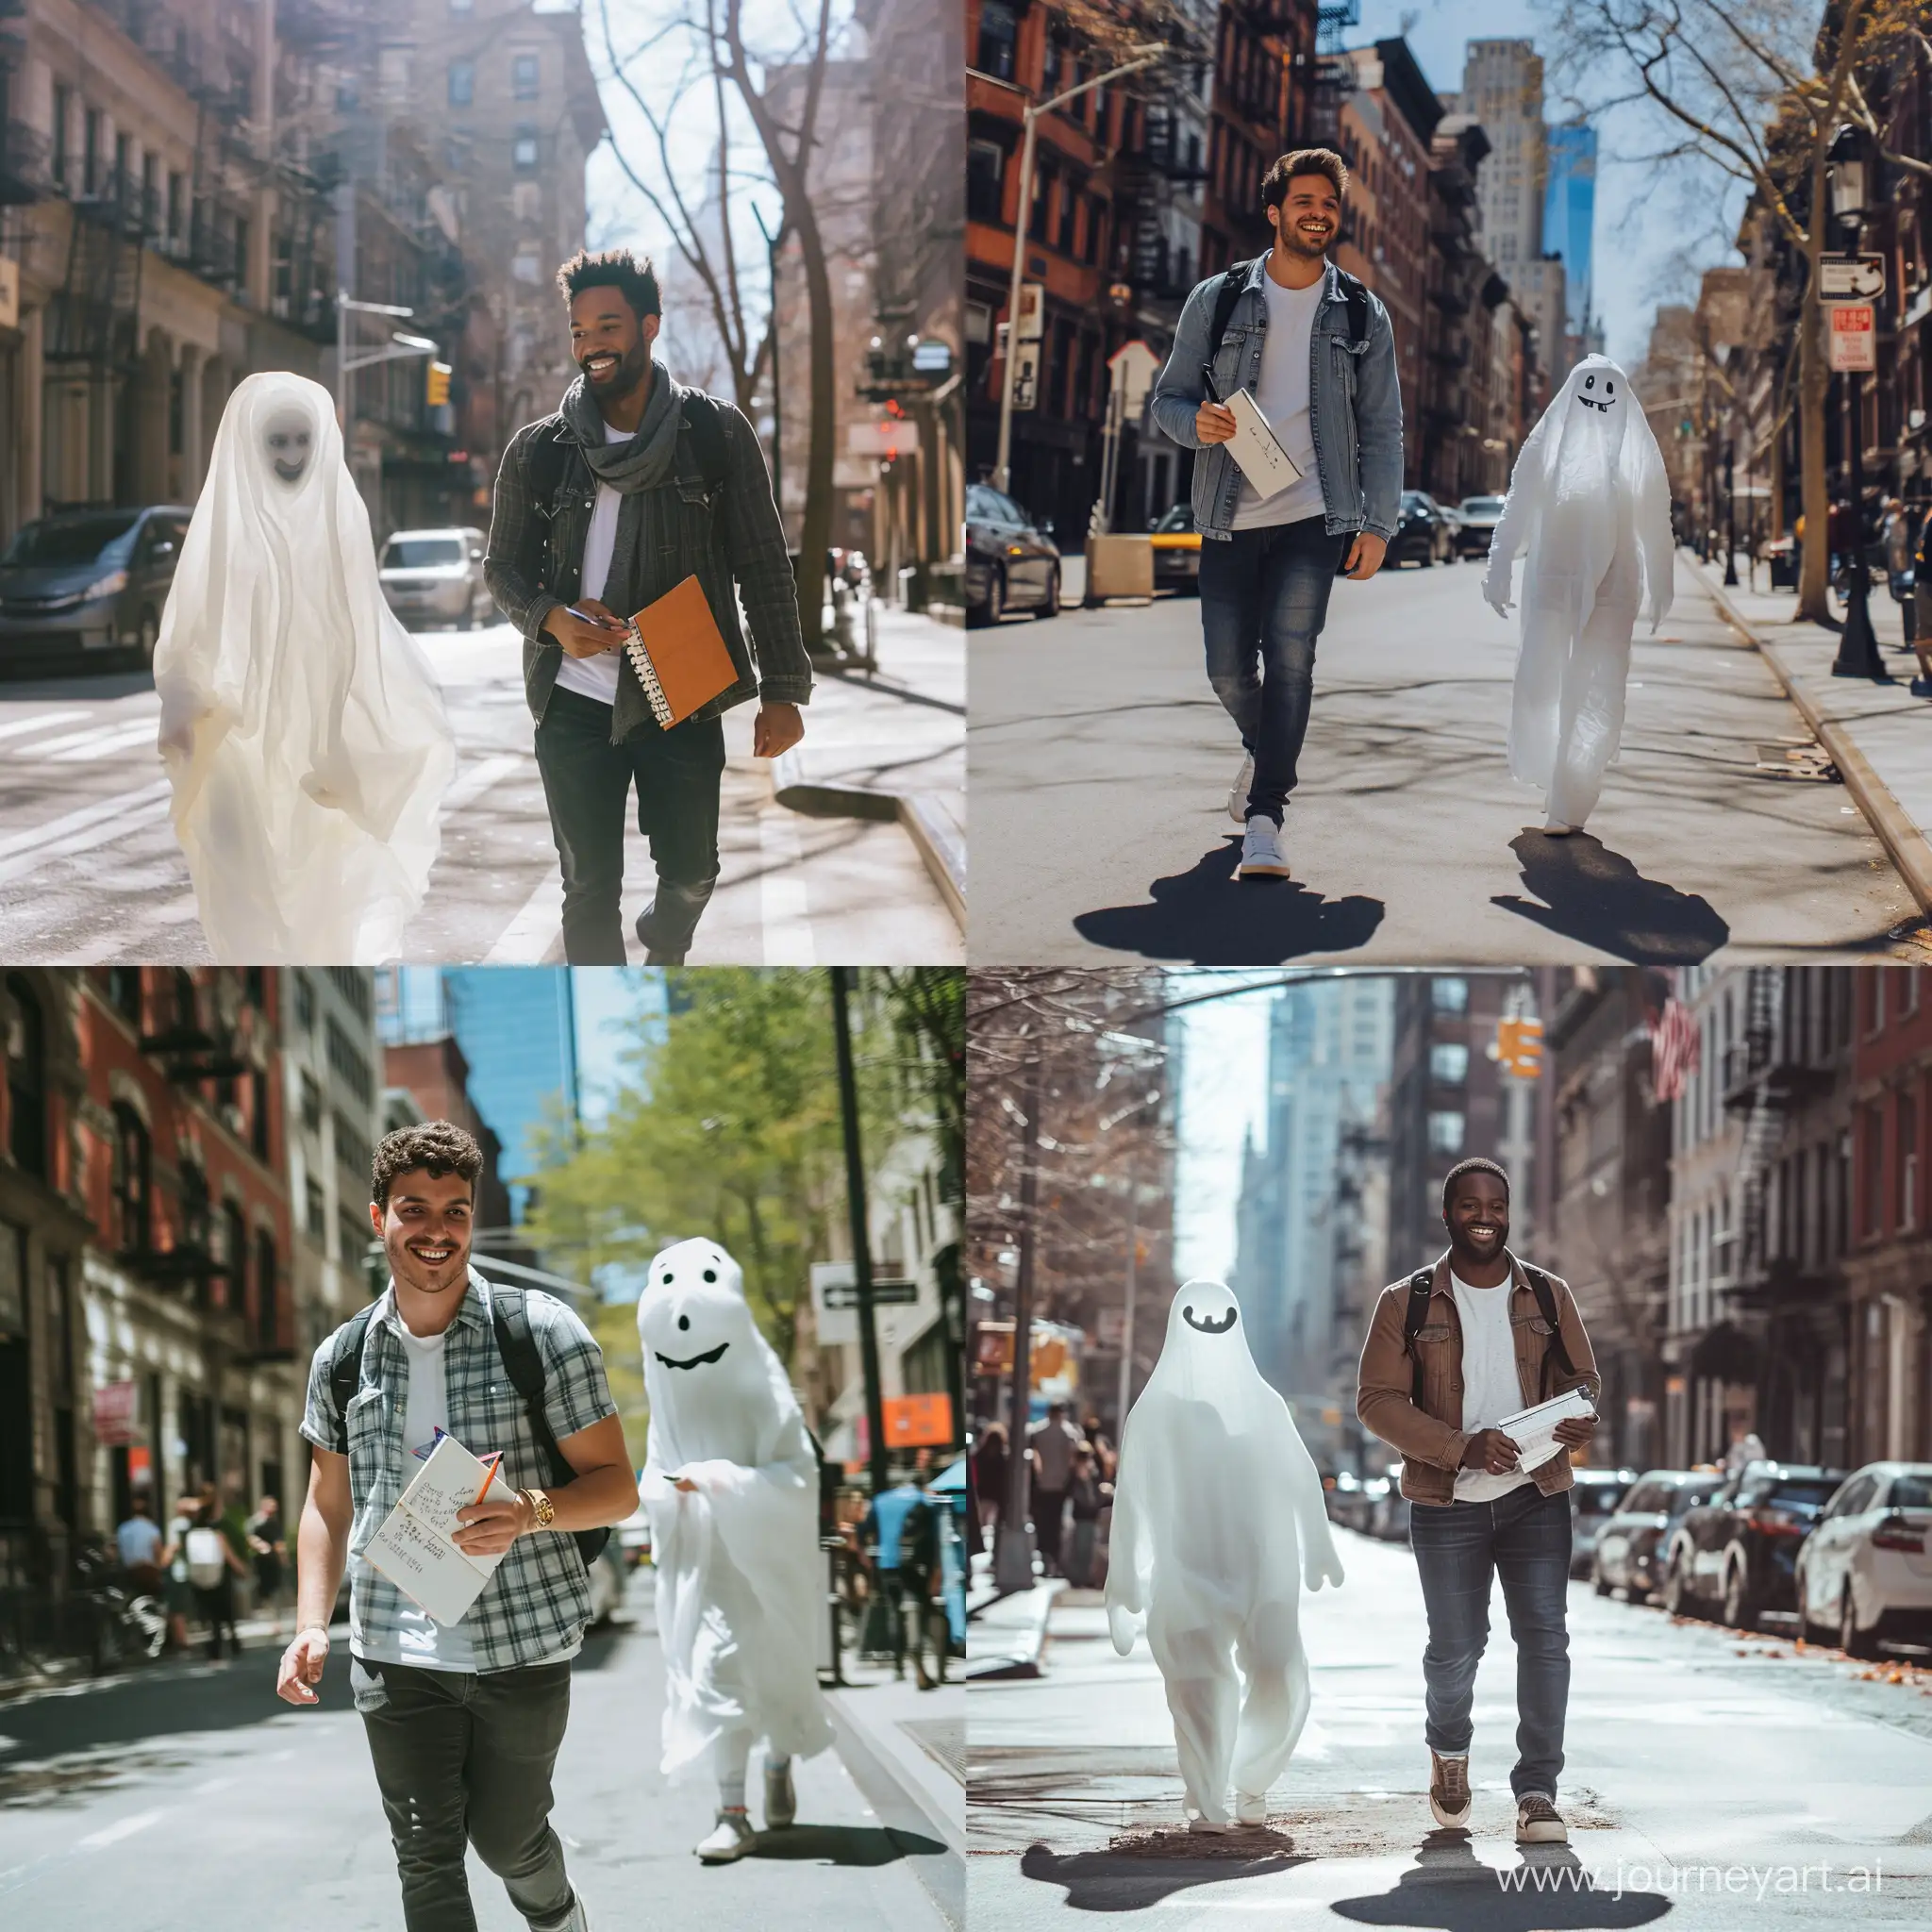 all whole total body photo of a man walking on a sunny New York street, smiling, confident, with a semi-transparent friendly ghost following him and writing down in the notebook, full figure photo, DSLR quality 